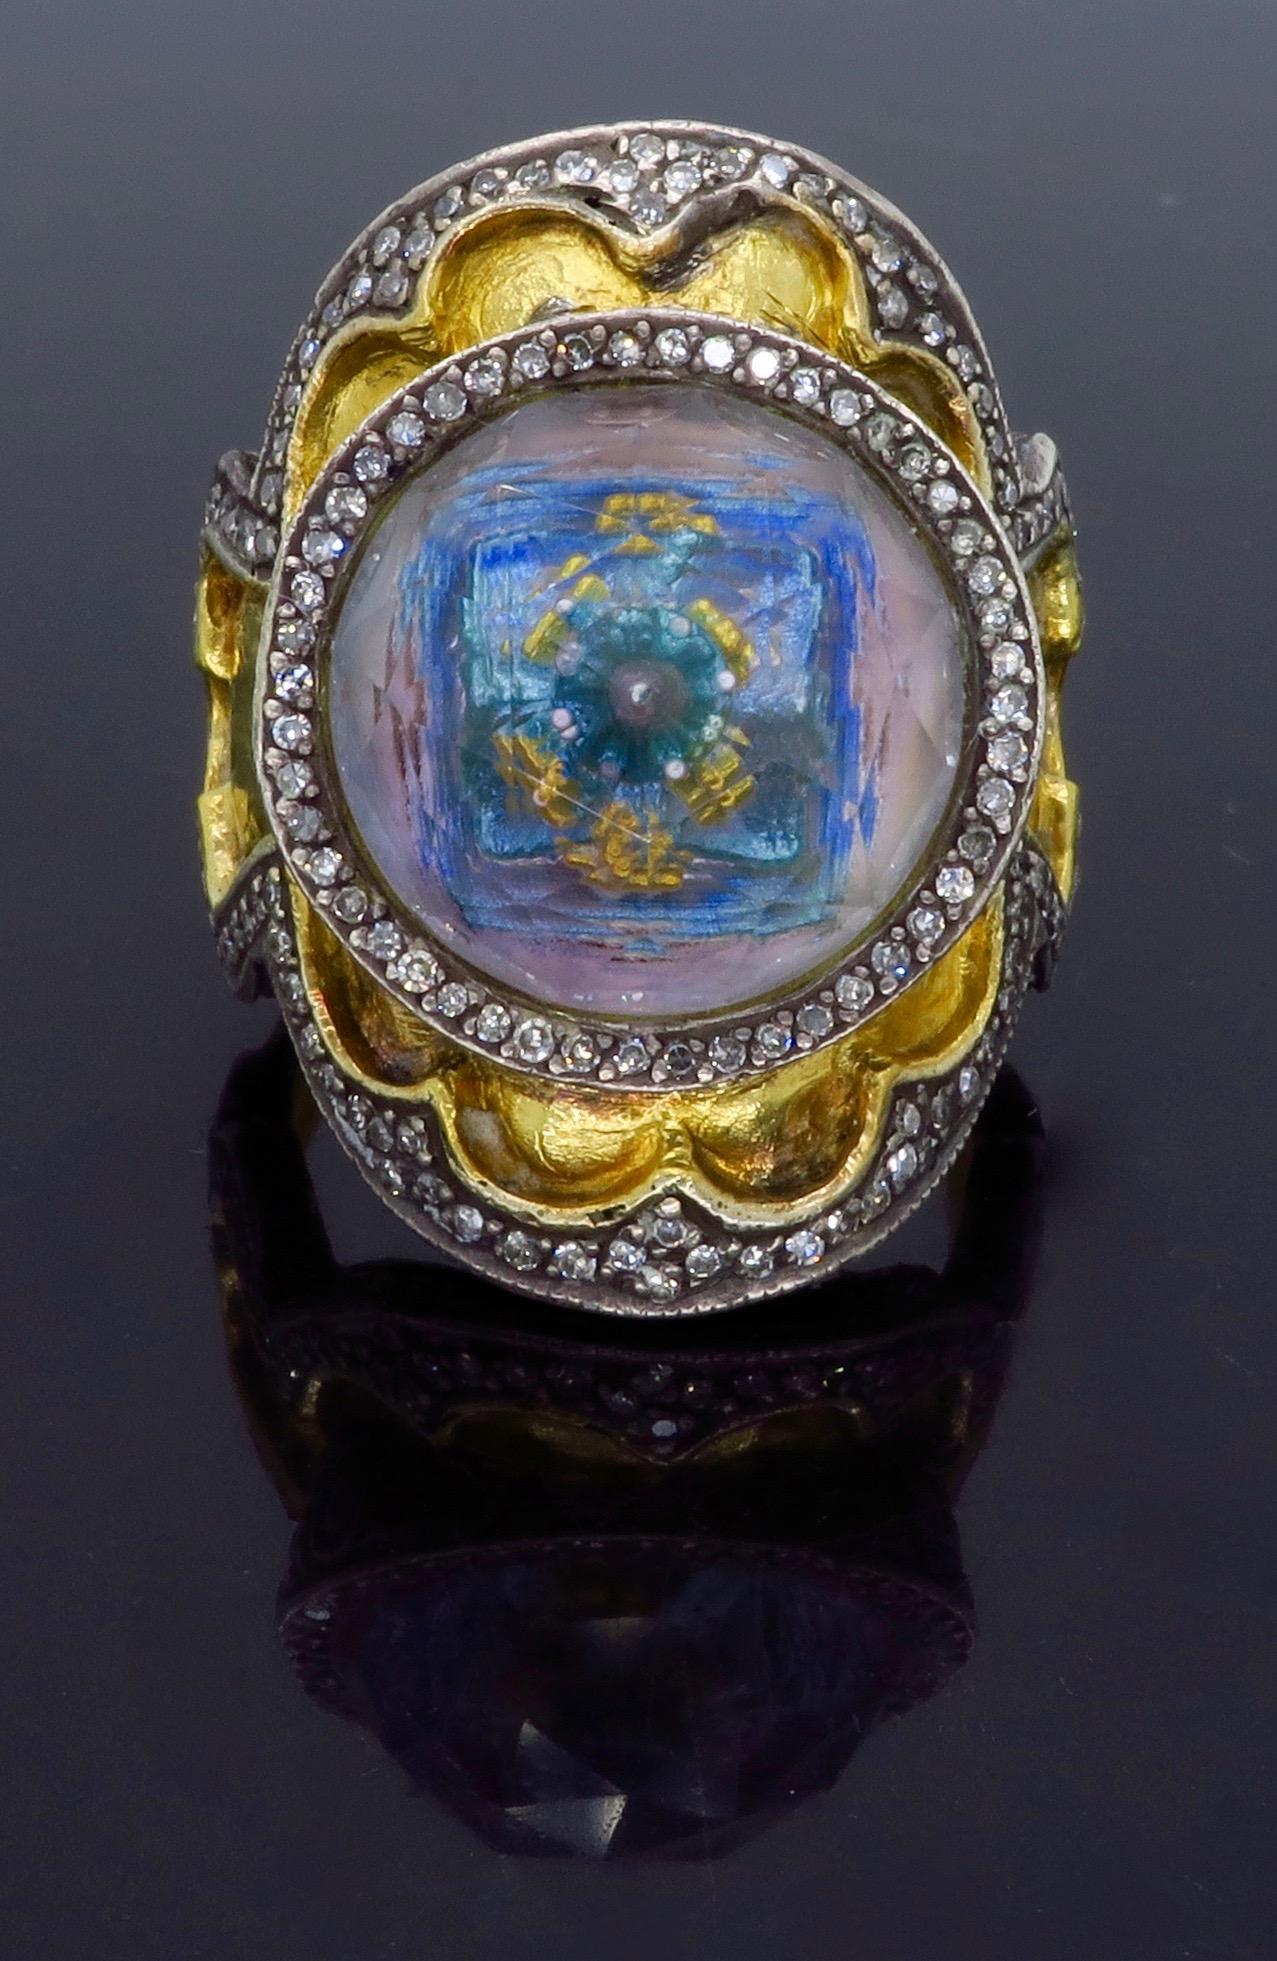 Hand crafted by the exclusive designer Sevan Biçakçi from his Theodora collection. All of Sevan's rings are one of a kind. The ring is 24K yellow gold with sterling silver accents. It features a large reverse cut amethyst that contains a beautiful